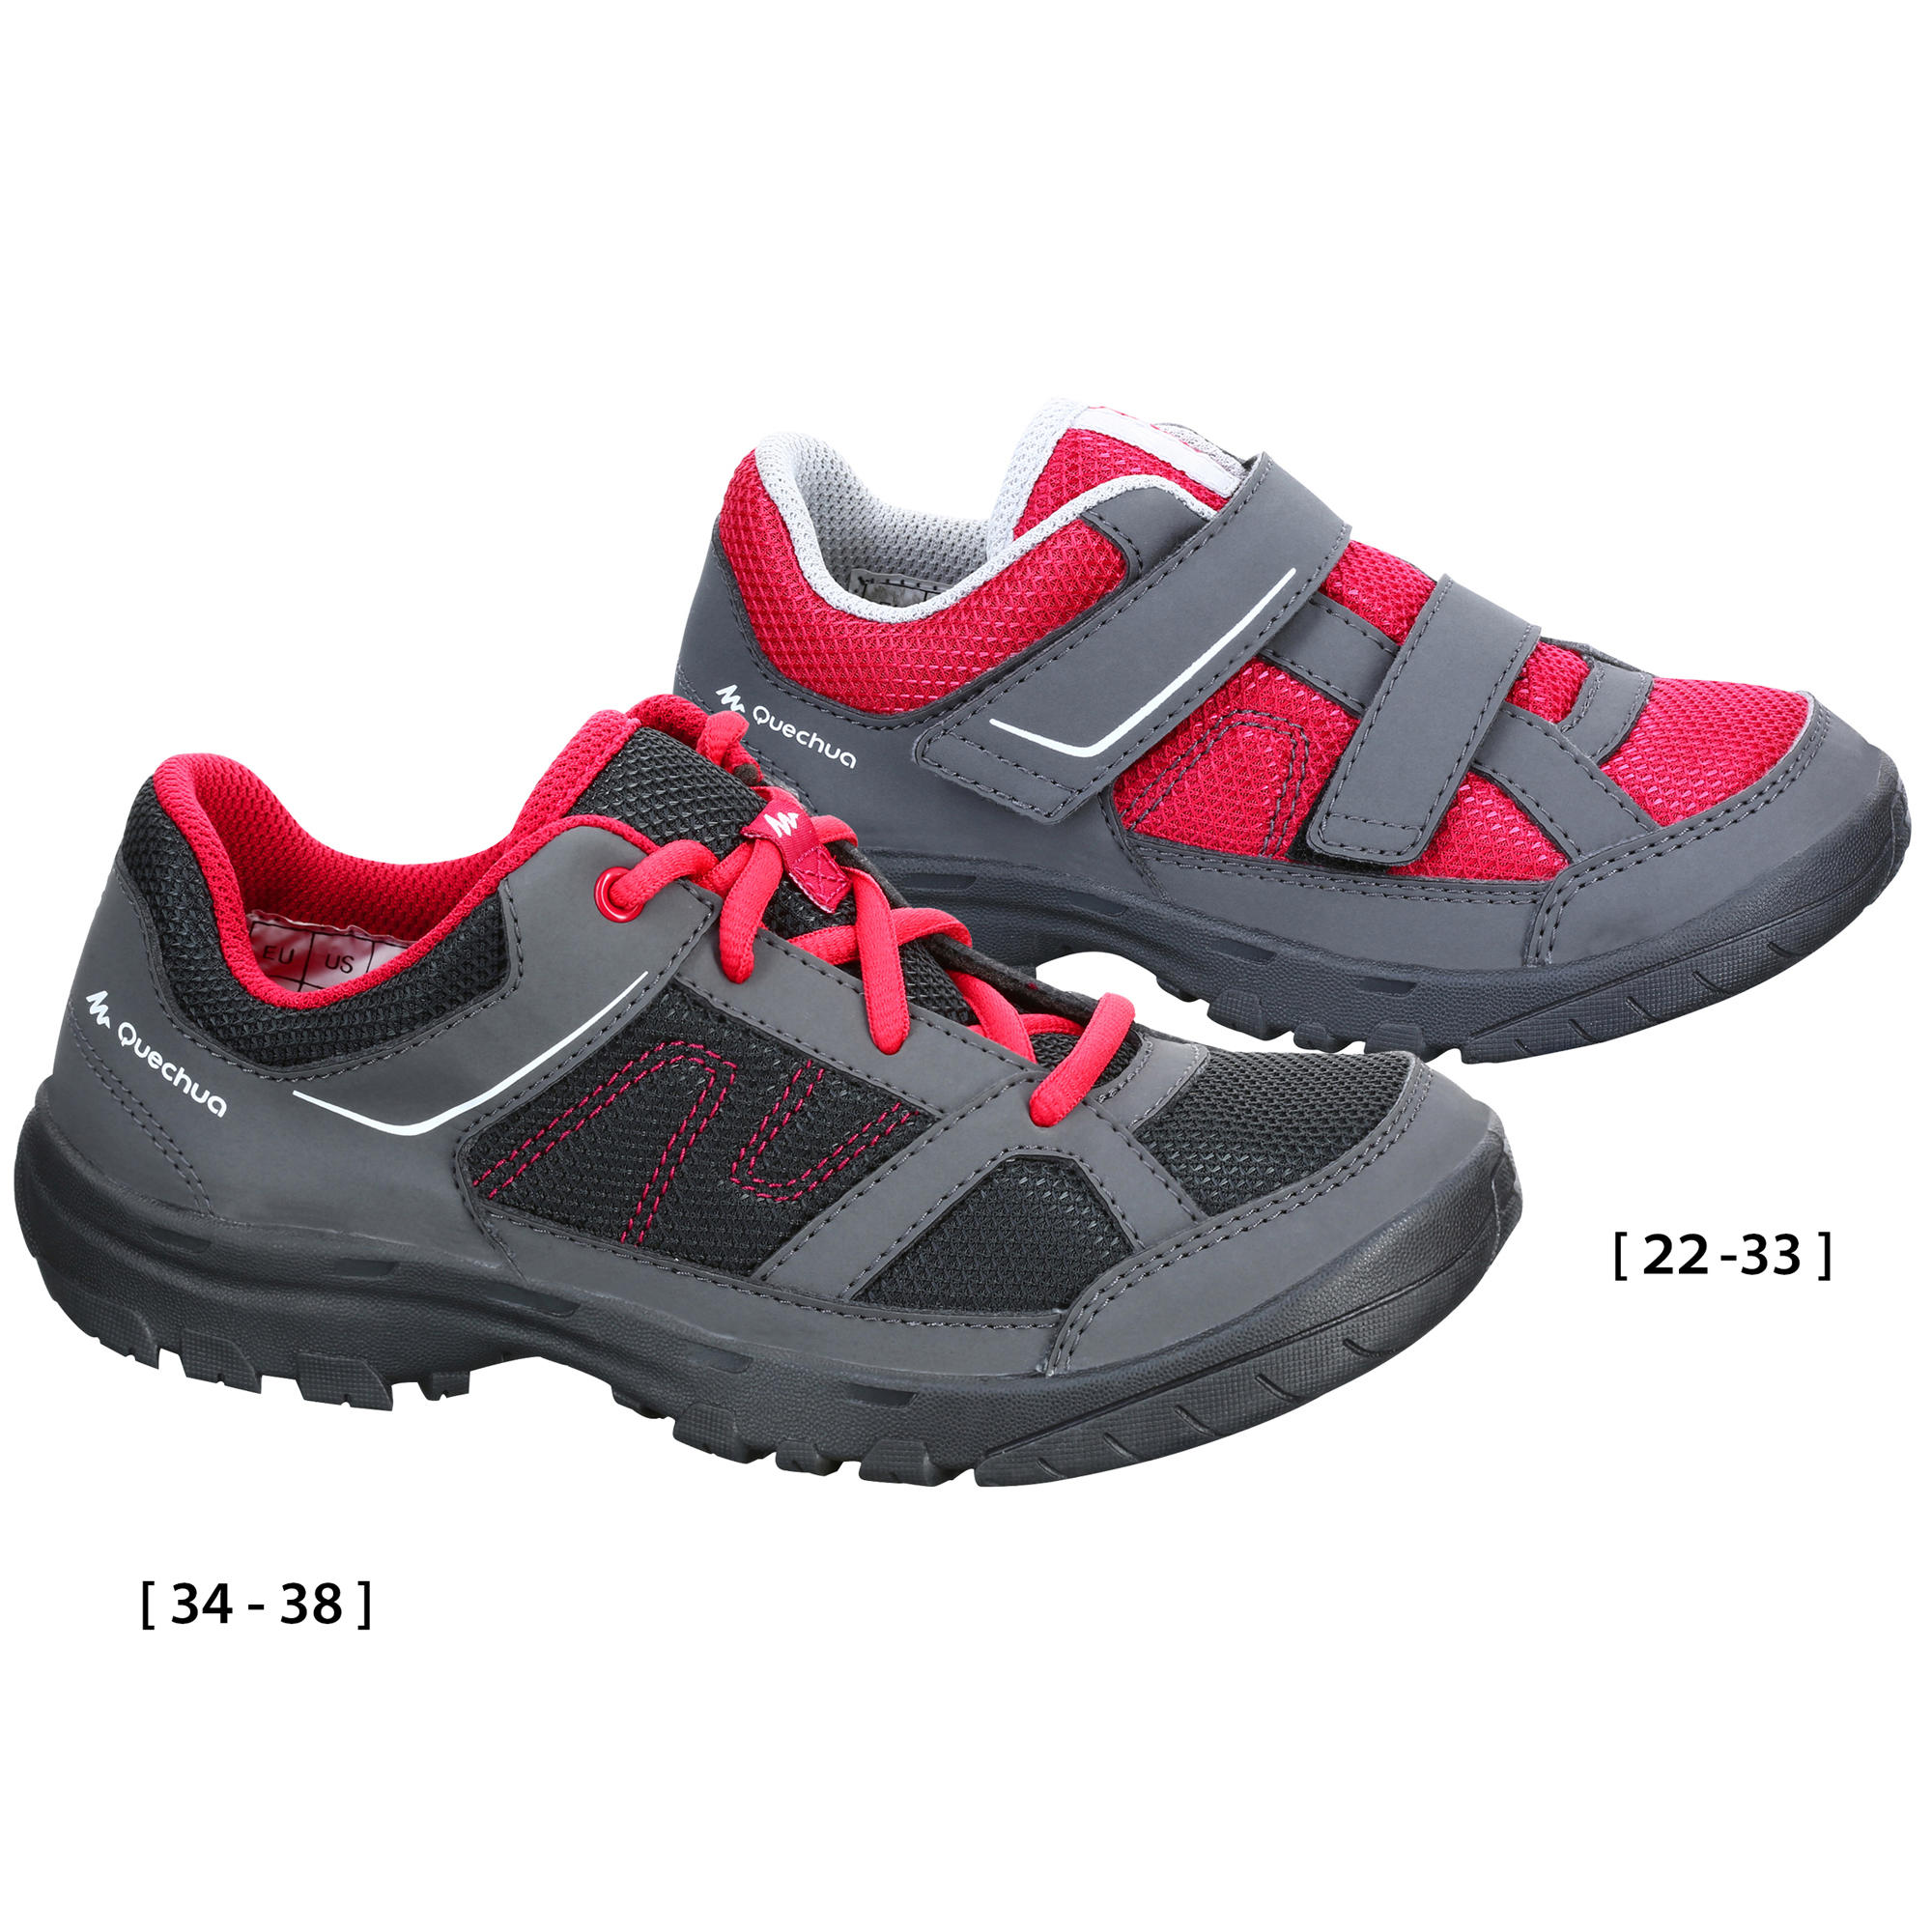 Decathlon Sports Bangladesh - LOWEST PRICE - BEST VALUE, thanks to Made In  Bangladesh! Decathlon Sports Bangladesh finally offers the first running  shoe that is directly sourced from one of our Bangladeshi